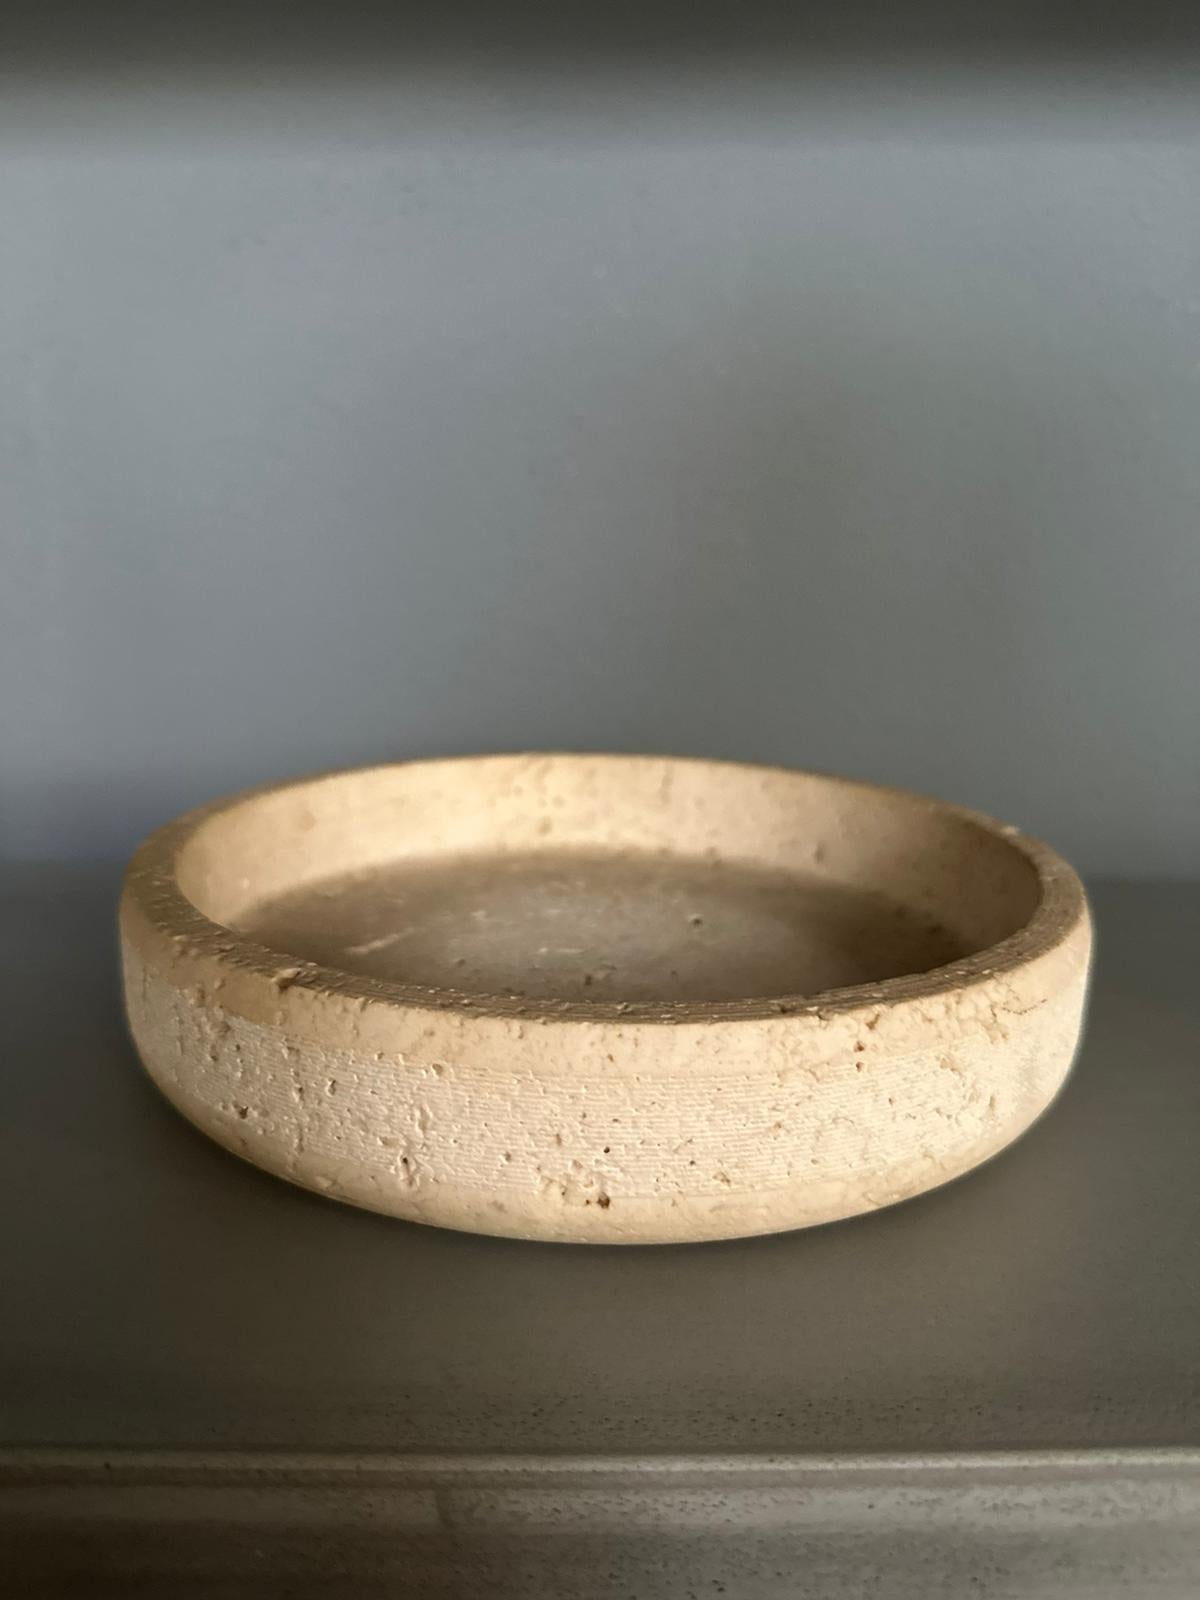 Mid-Century Modern Bowl Centerpiece by Up&Up by E.Di Rosa P.A Giusti, Travertine Marble, 1970 For Sale